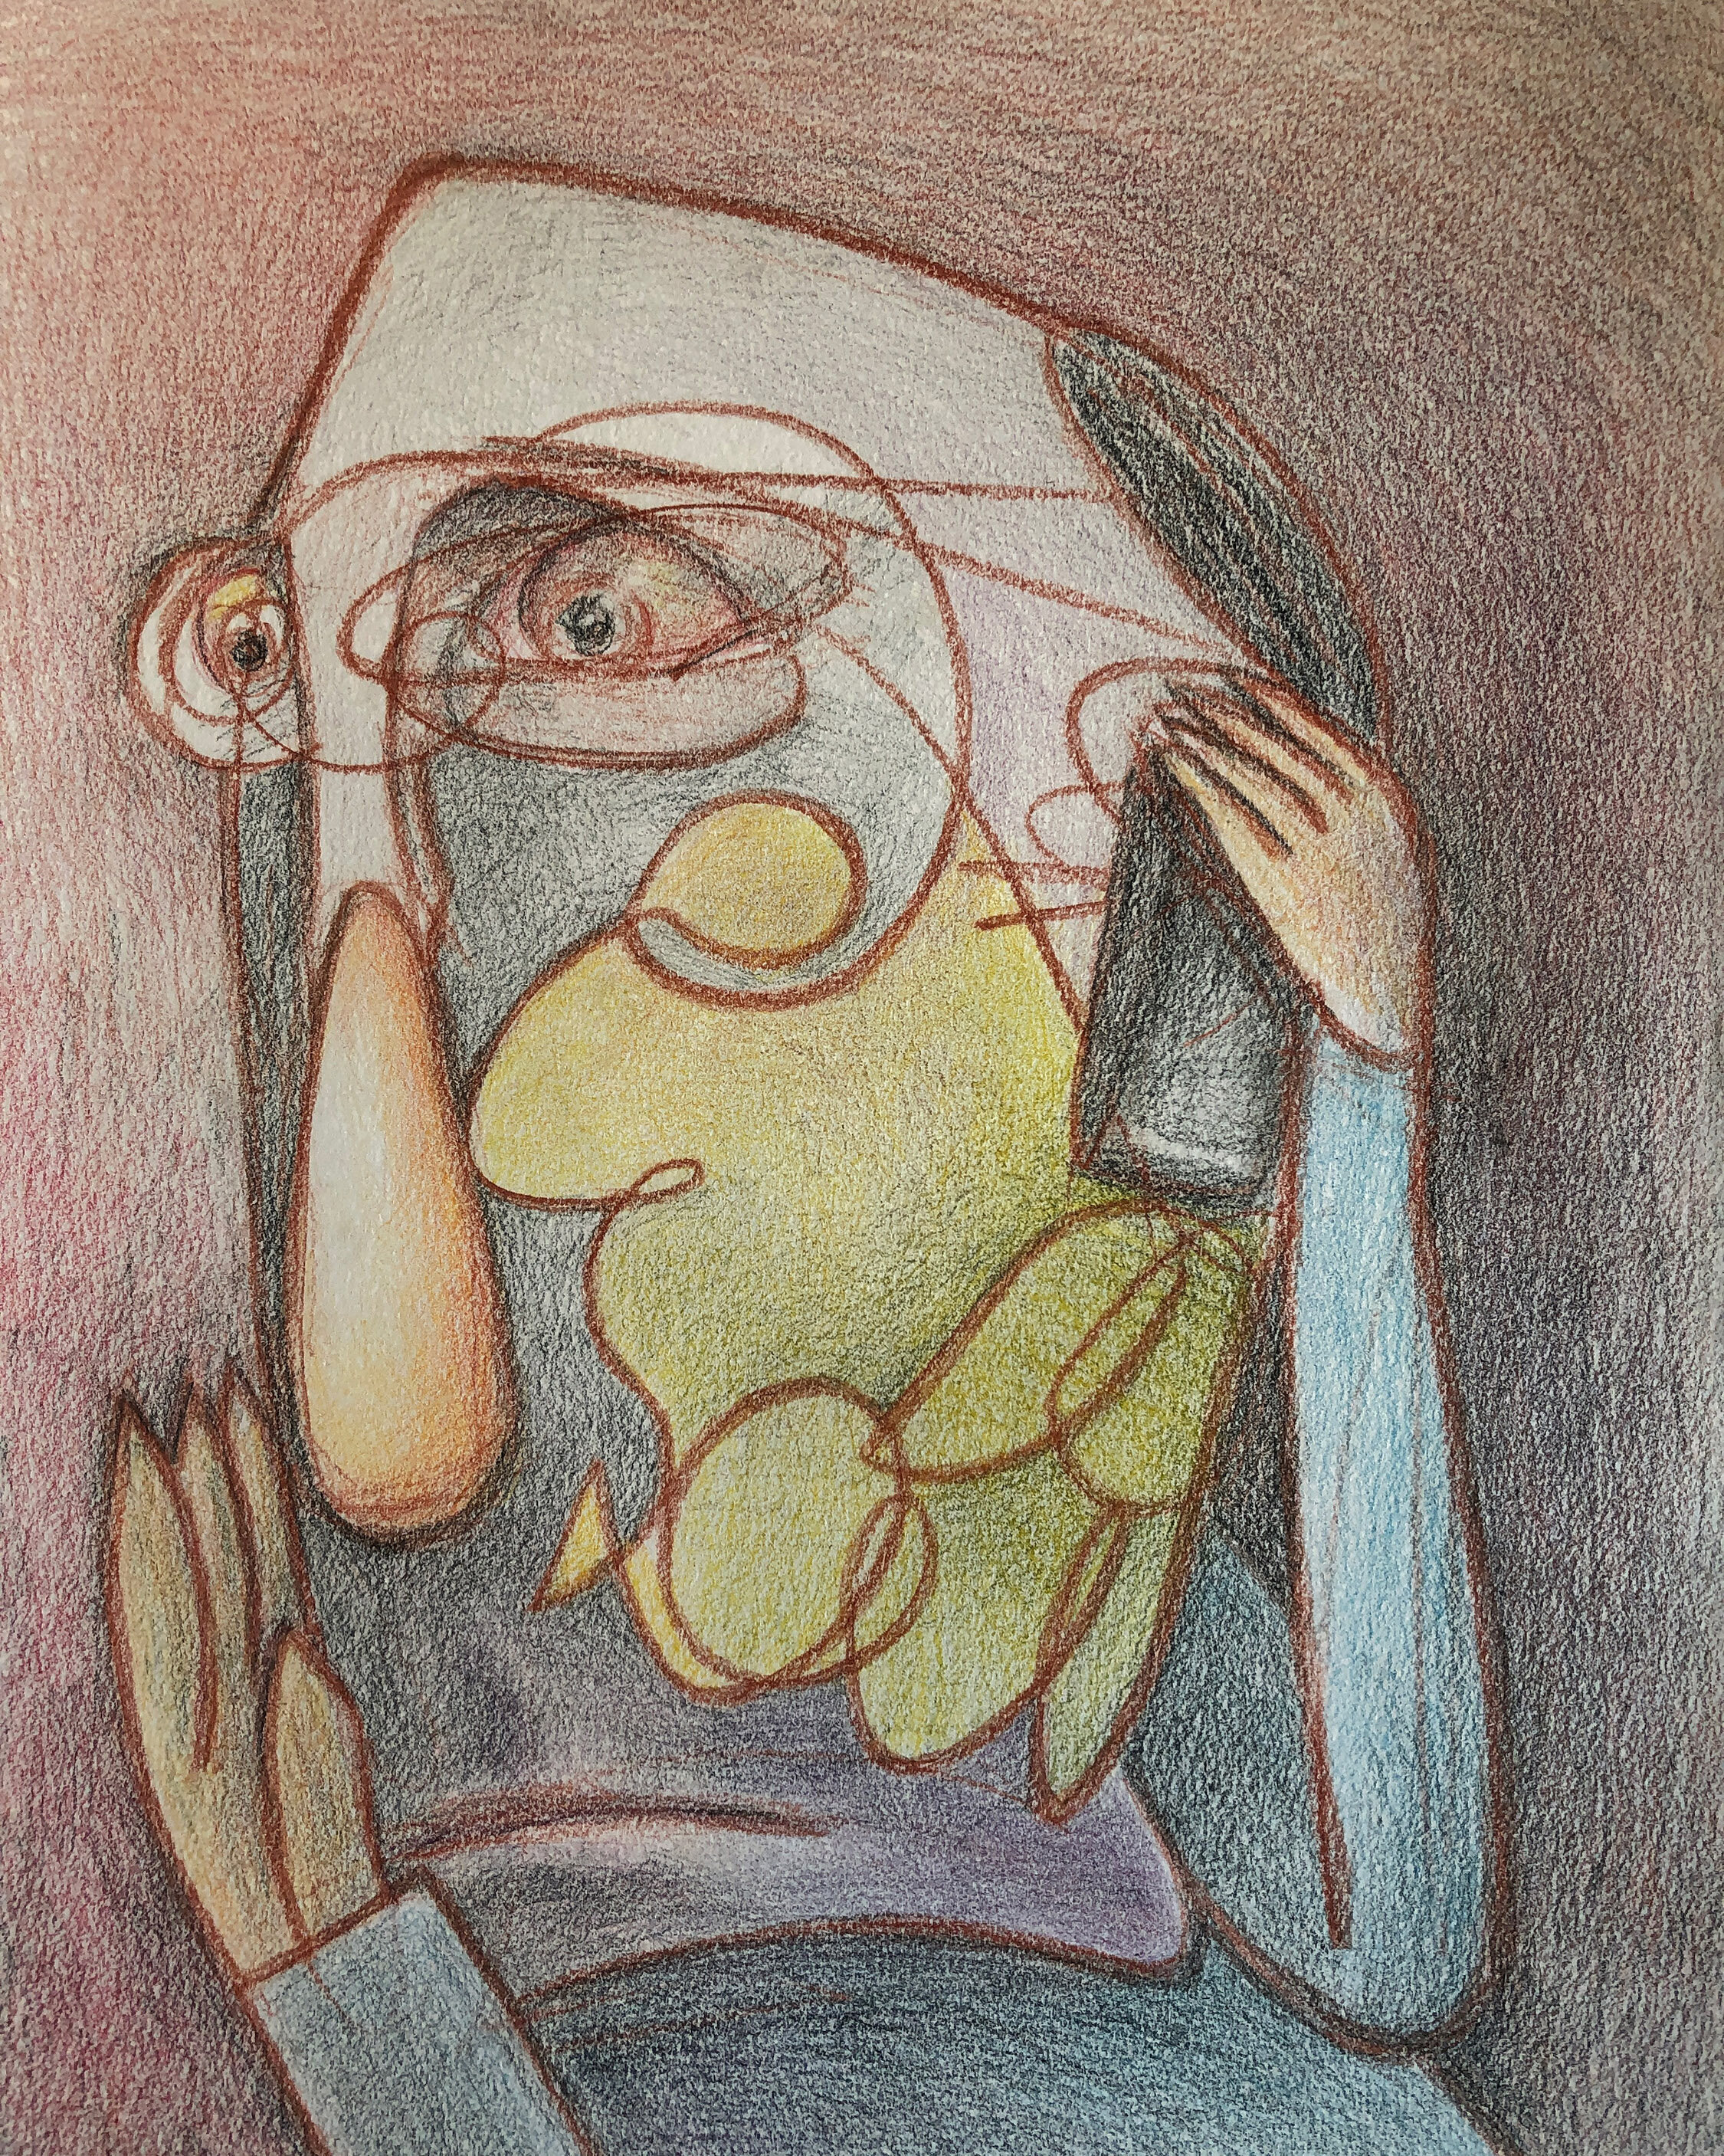 SOLD "The Call" 9" x12" Colored Pencil on Paper